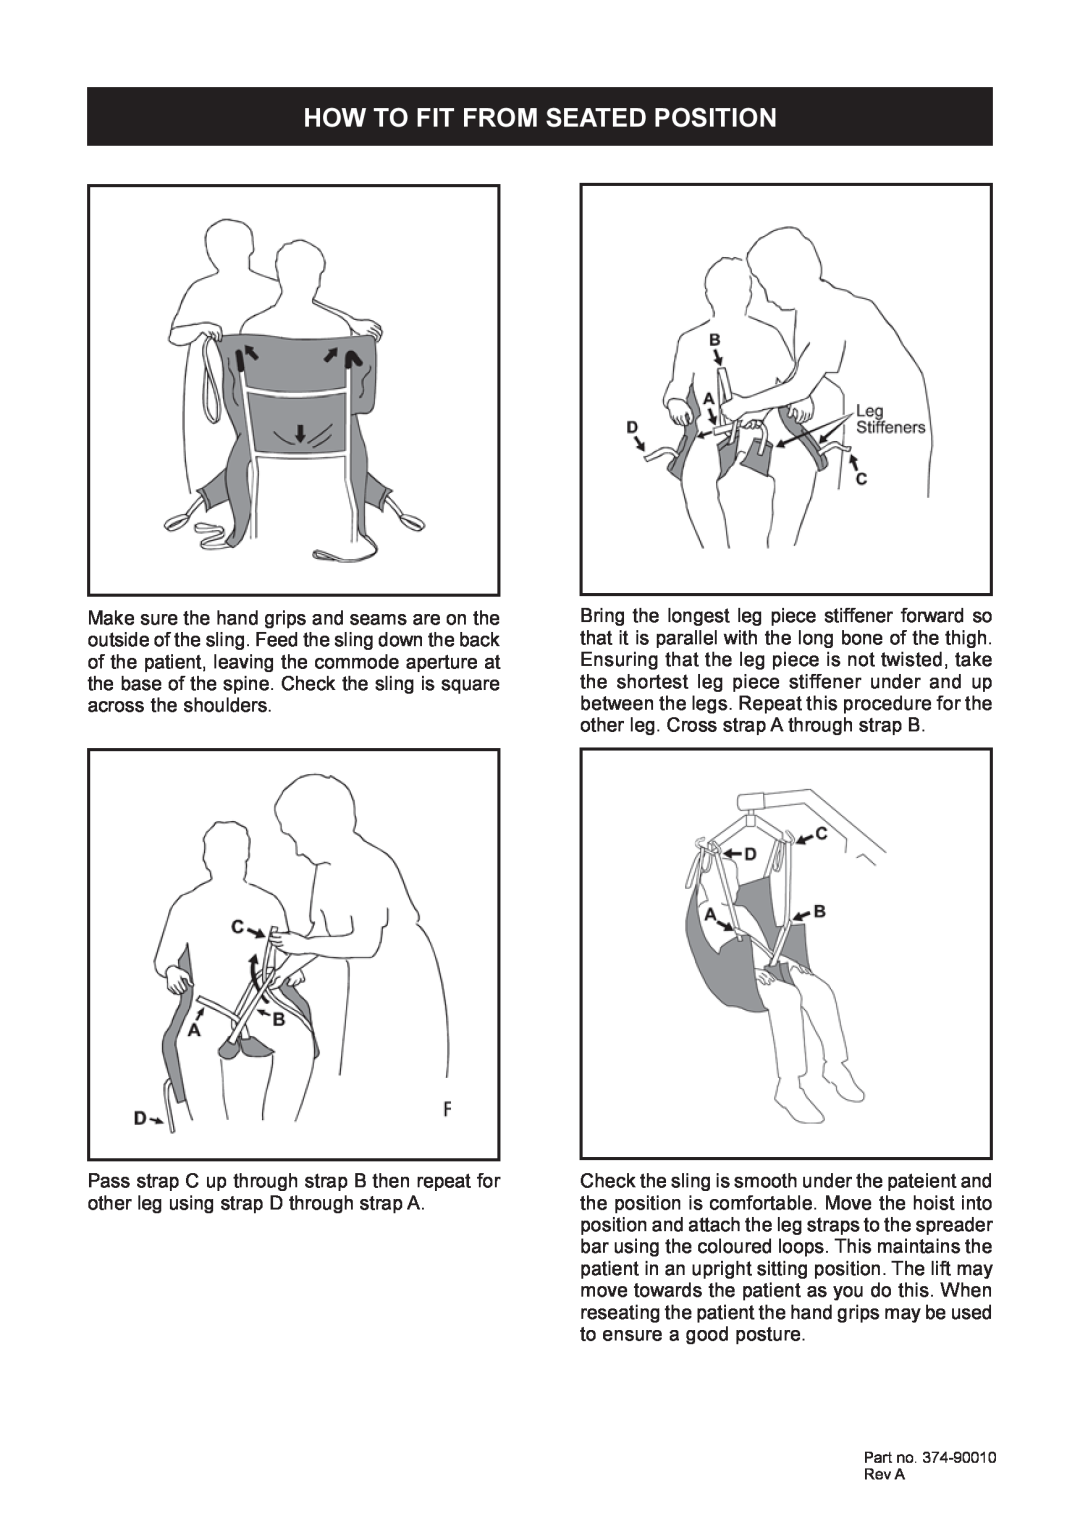 Sunrise Medical 374-90010 technical specifications How To Fit From Seated Position 